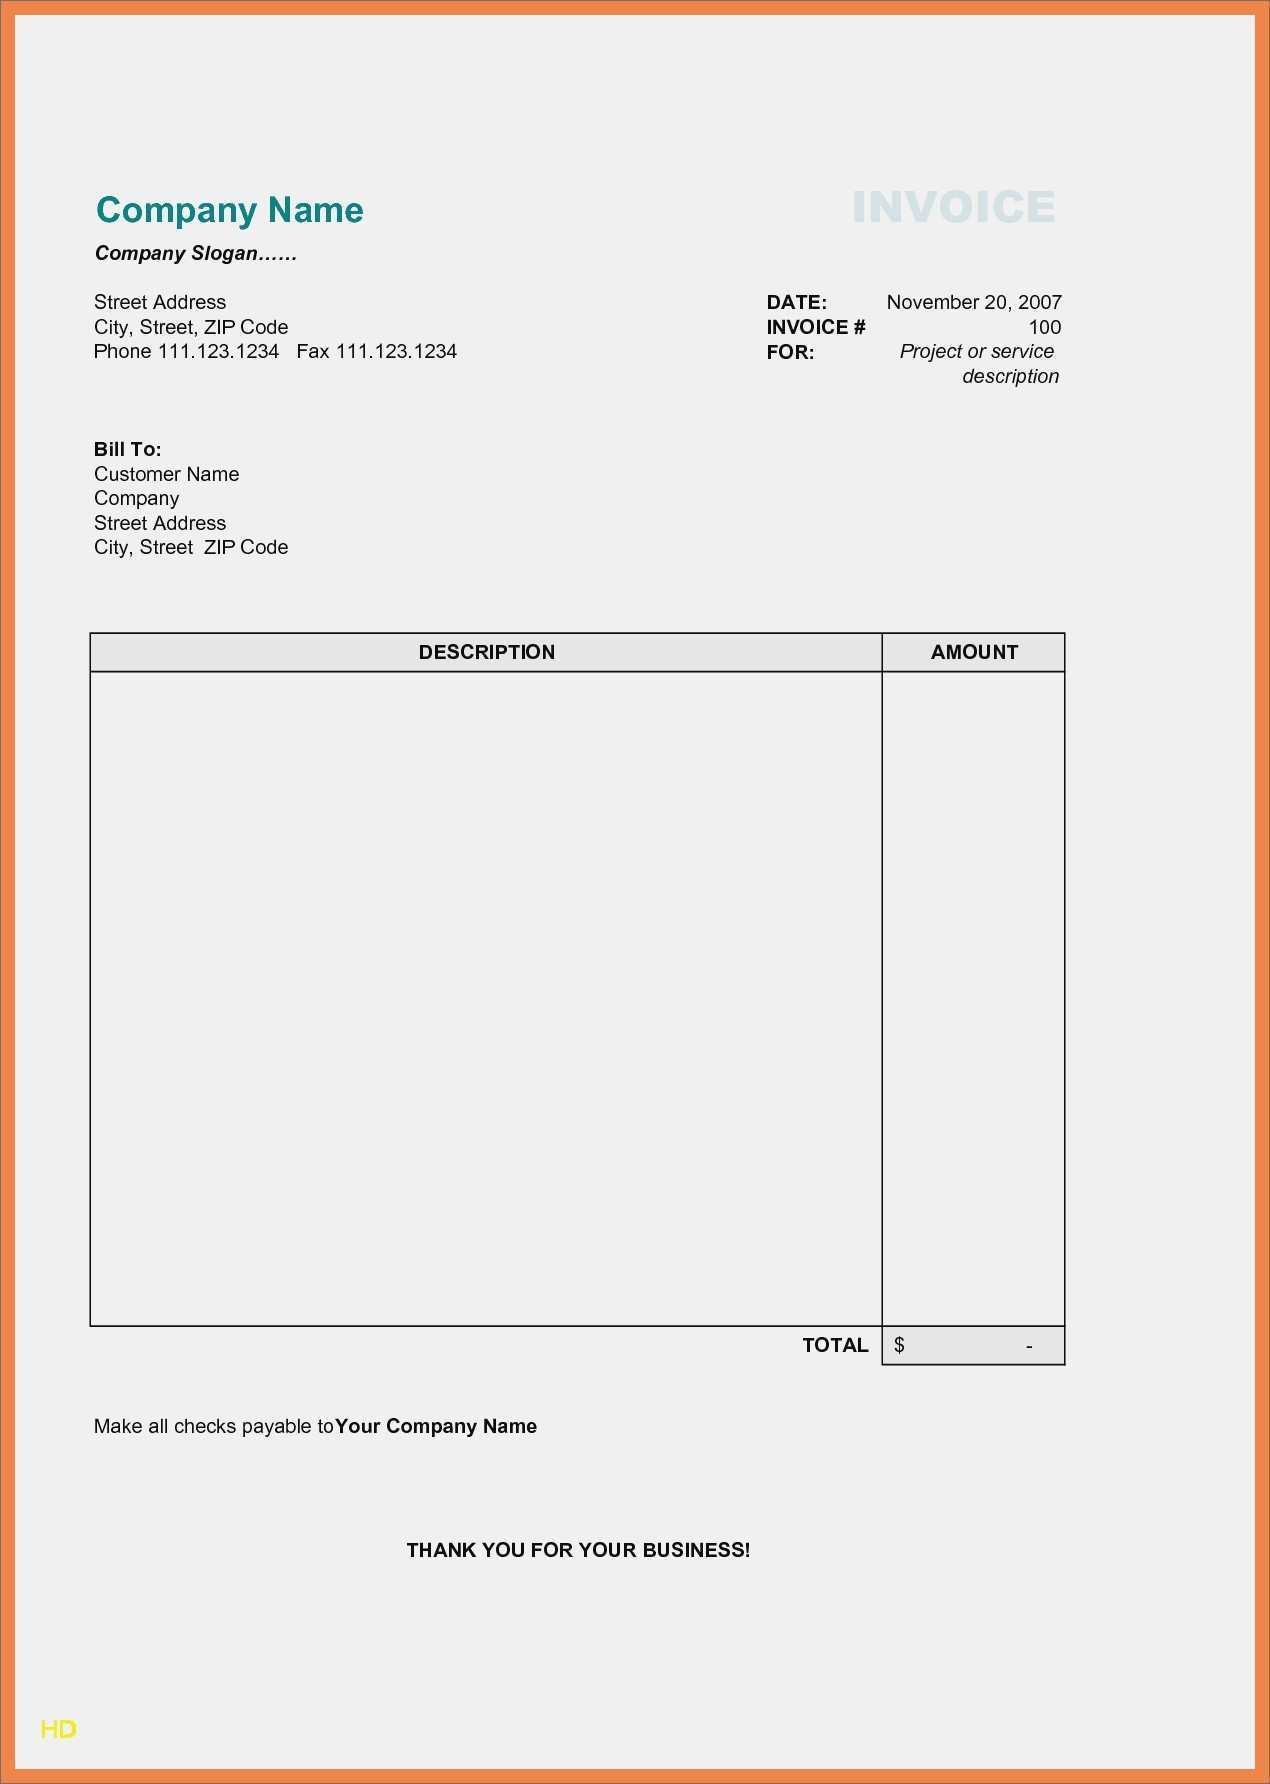 61 Format Blank Business Invoice Template Photo with Blank Business Invoice Template